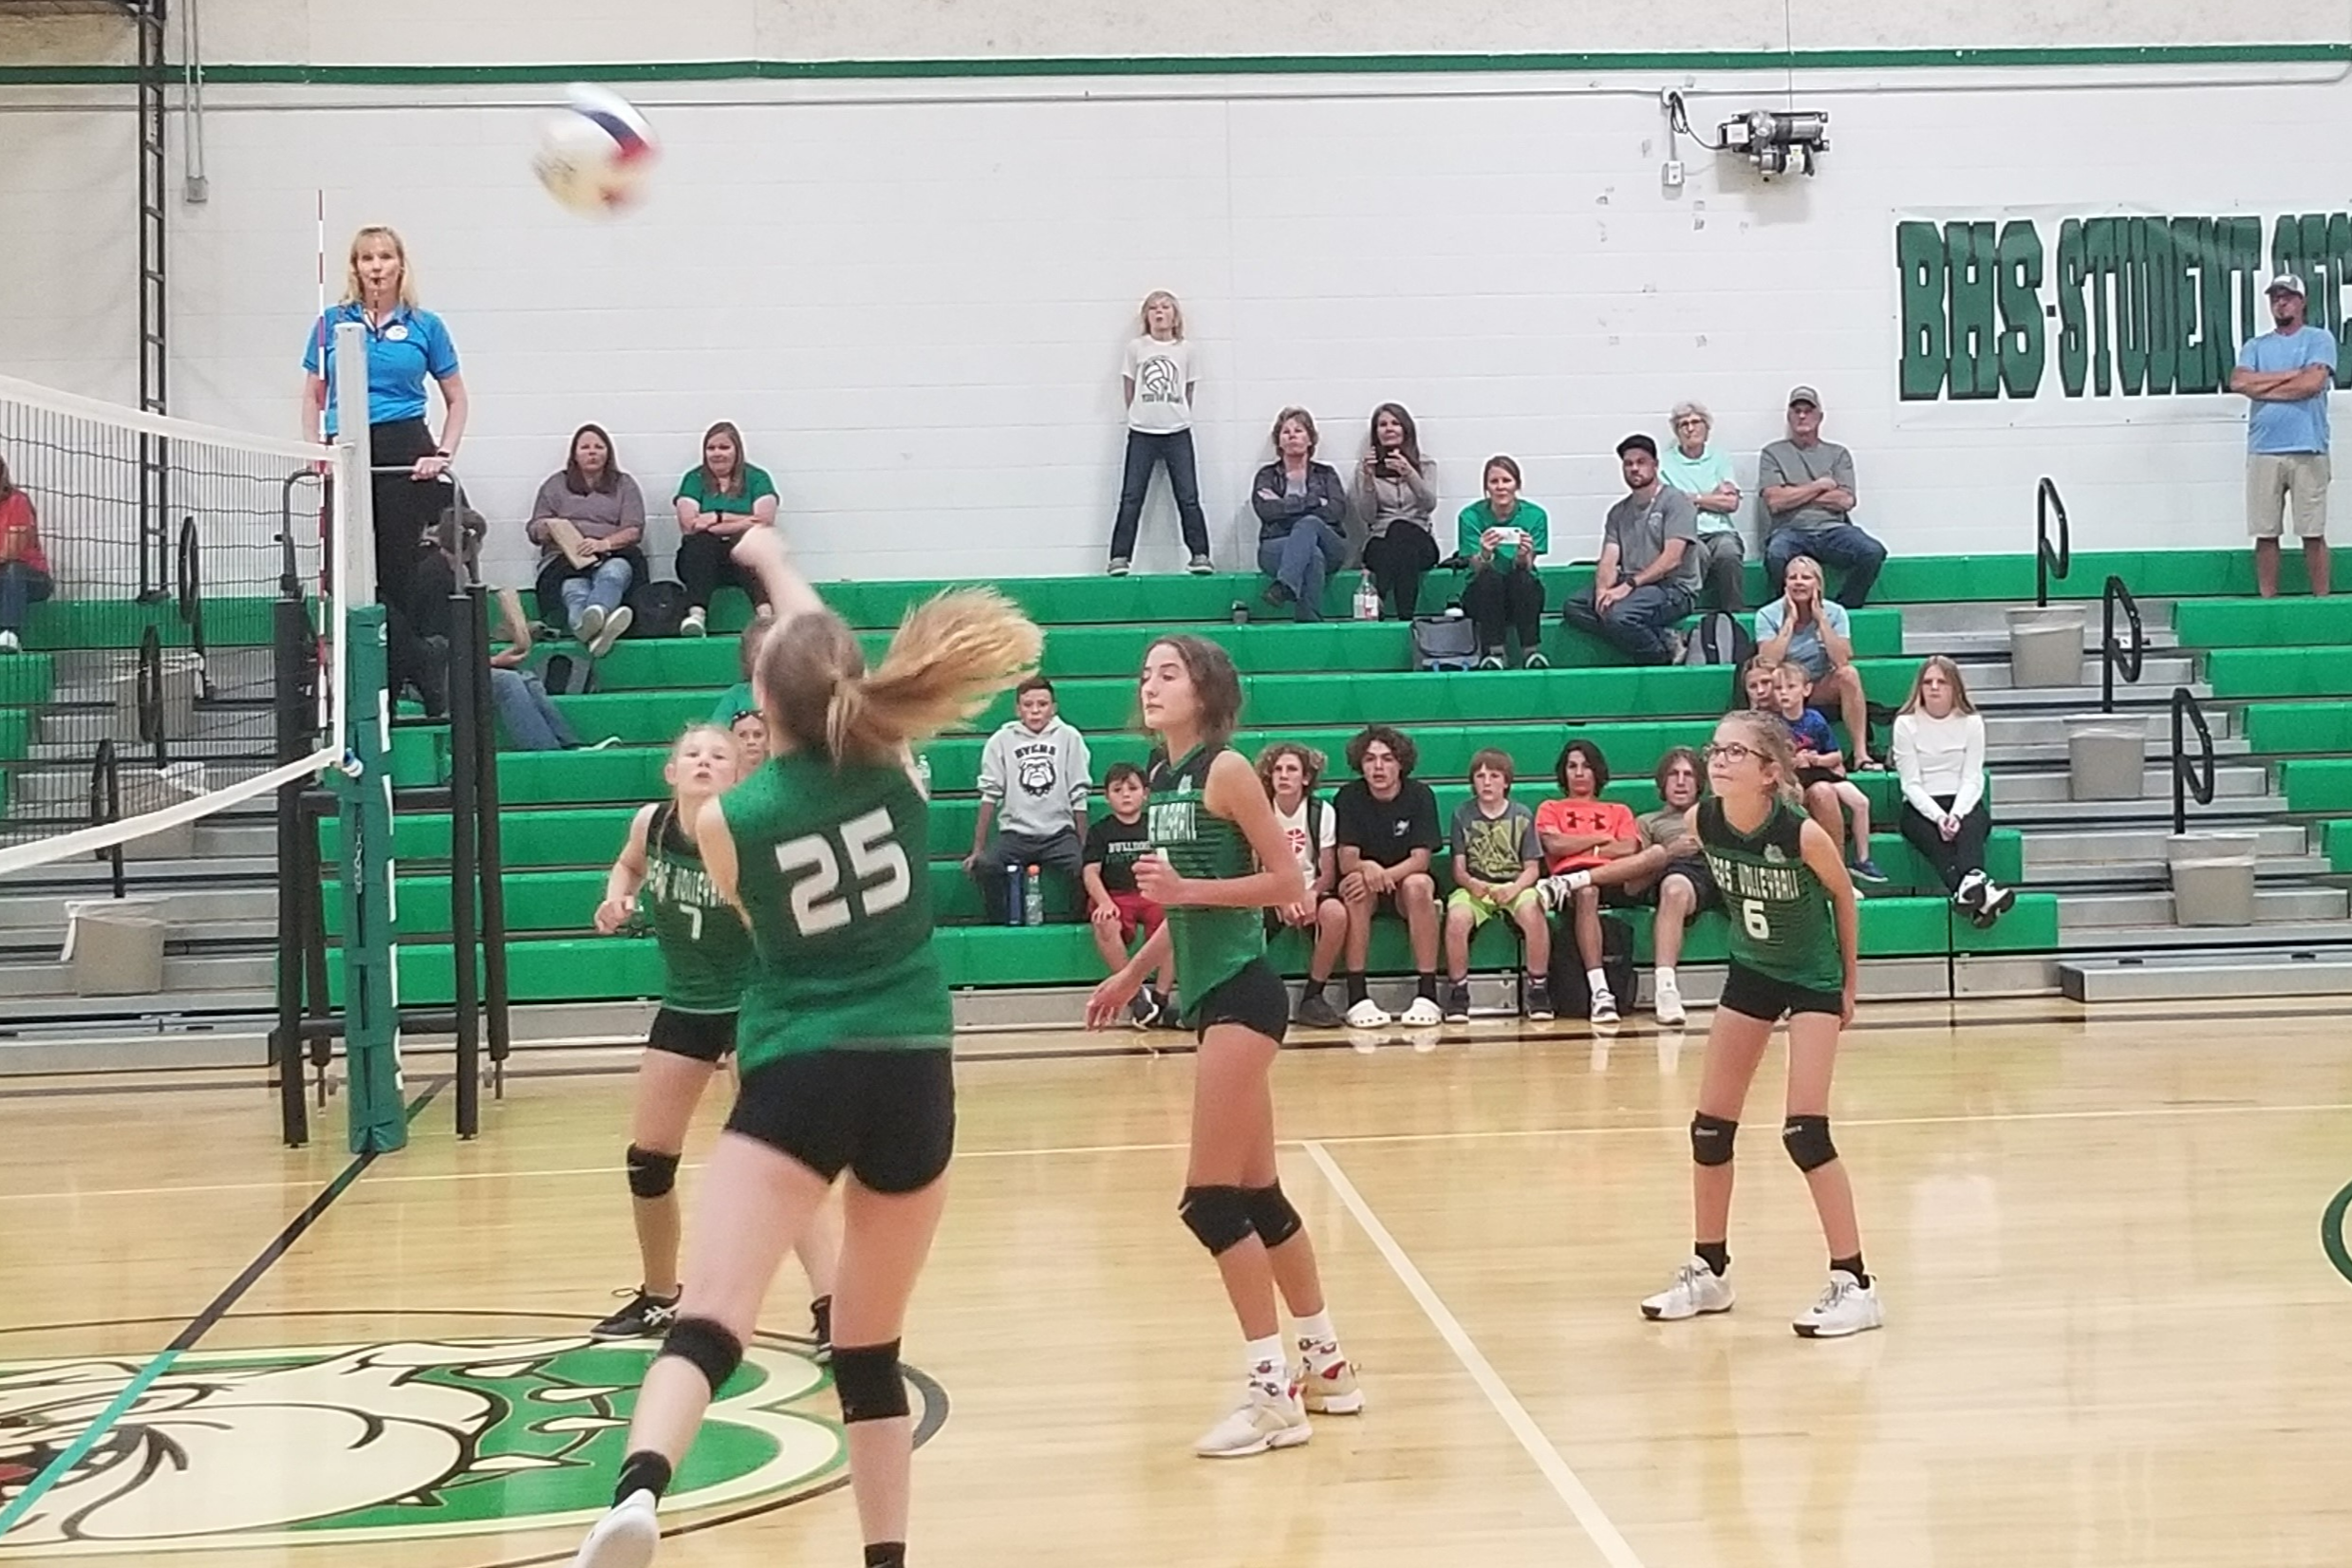 JH Volleyball Byers player #25 passing the ball over the net after a set.